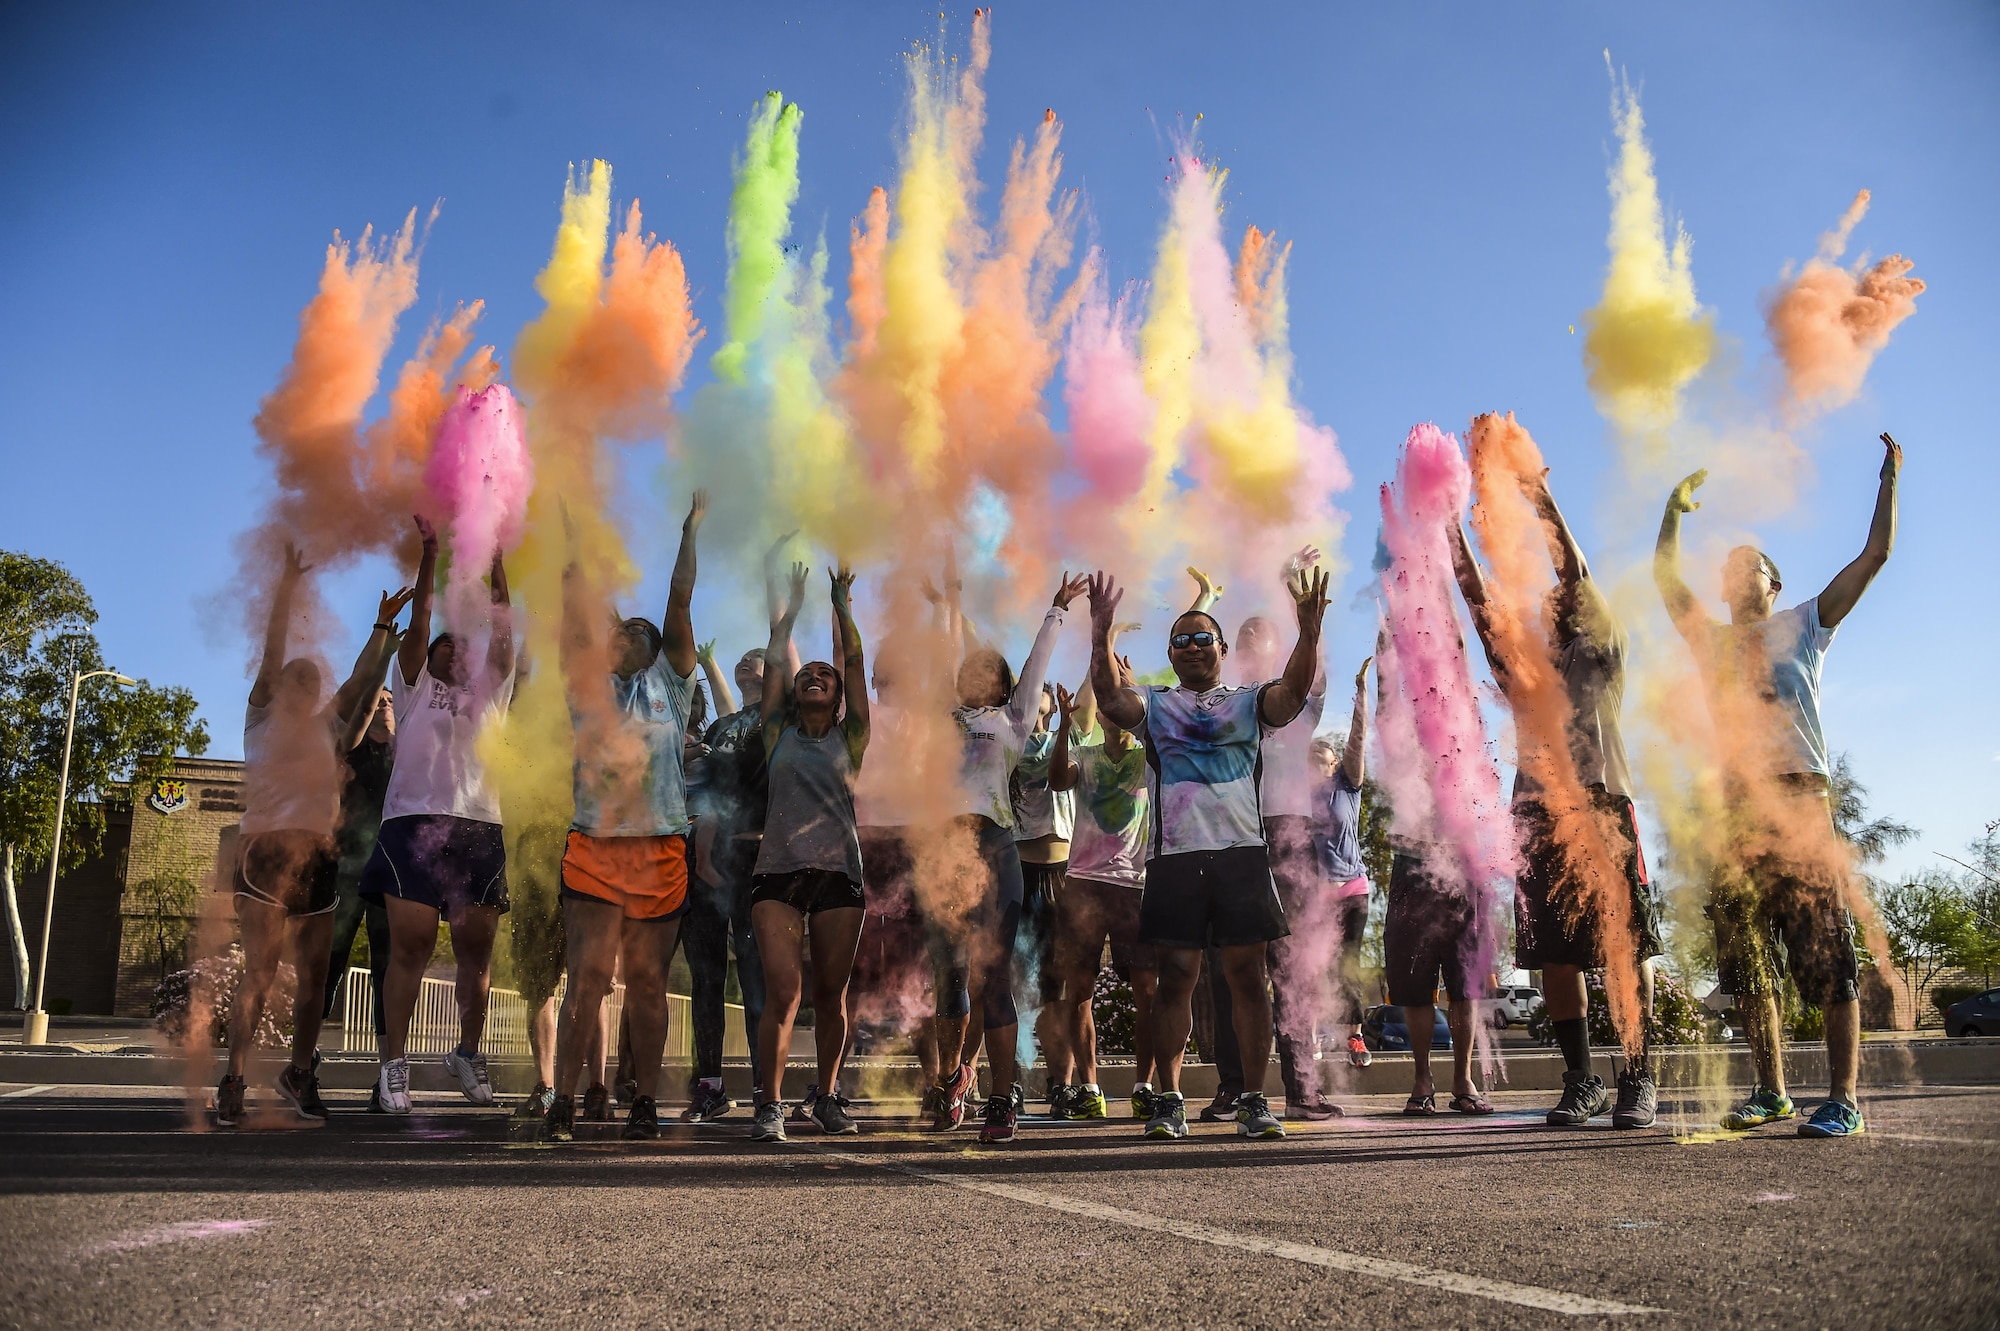 Volunteers and participants of the LGBT Pride Month 5k color run throw colored chalk into the air as a celebration for completing the run June 1, 2017 at Luke Air Force Base, Ariz. In 2009, President Barack Obama issued the month of June as Lesbian, Gay, Bisexual and Transgender Pride Month. Since then, military installations around the globe have participated in events celebrating the diversity of the LGBT community. (U.S. Air Force photo by Airman 1st Class Caleb Worpel)